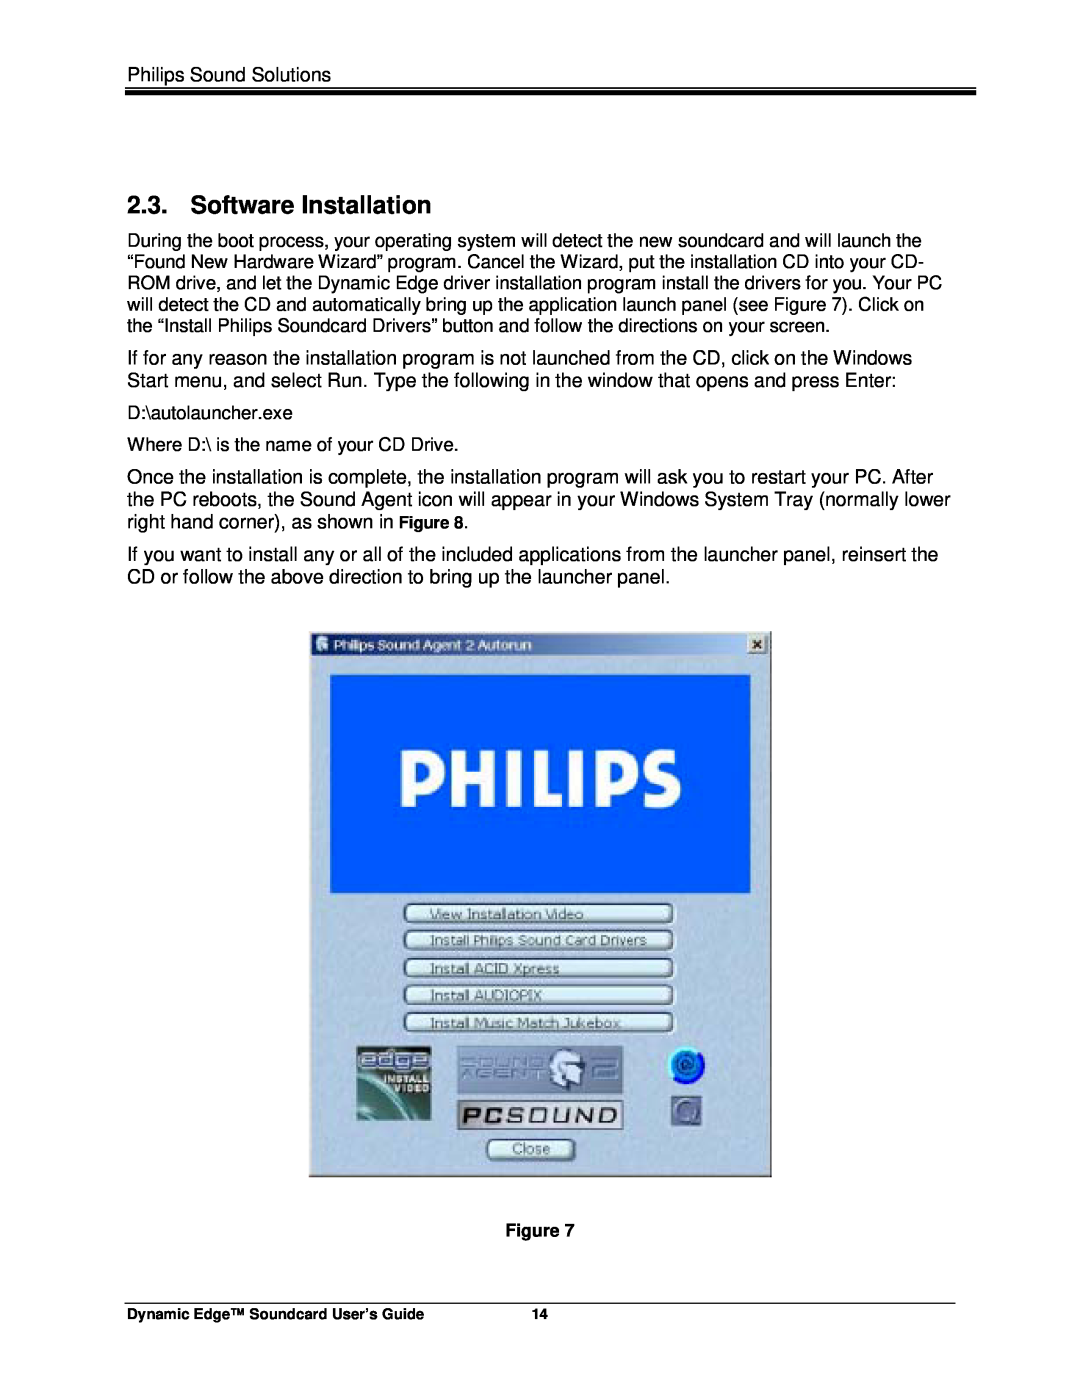 Philips PSC604 manual Software Installation 